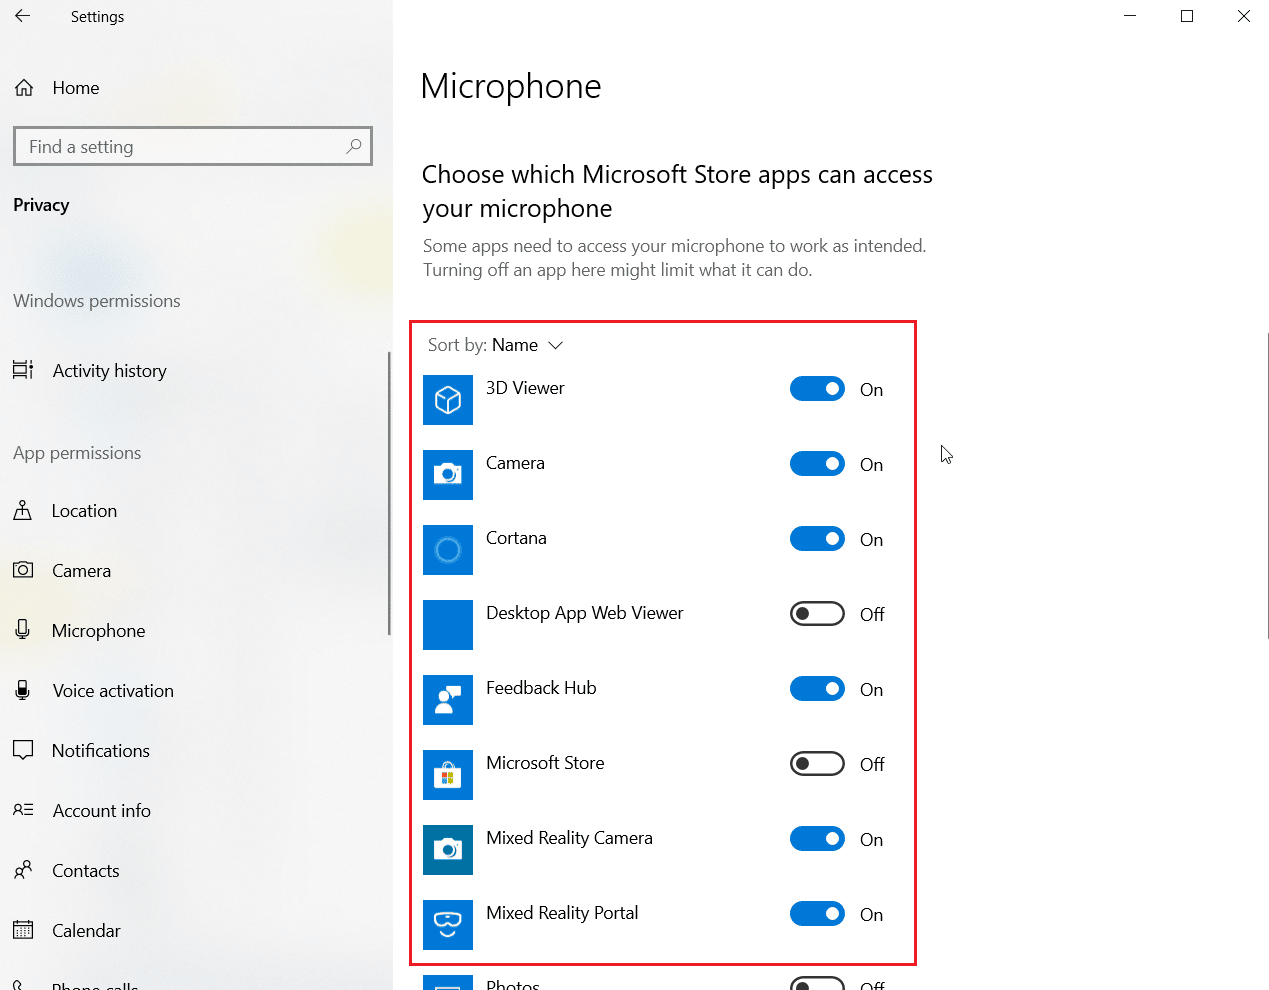 toggle microphone access to on or off to individuall apps. Fix SADES Headset Not Working in Windows 10